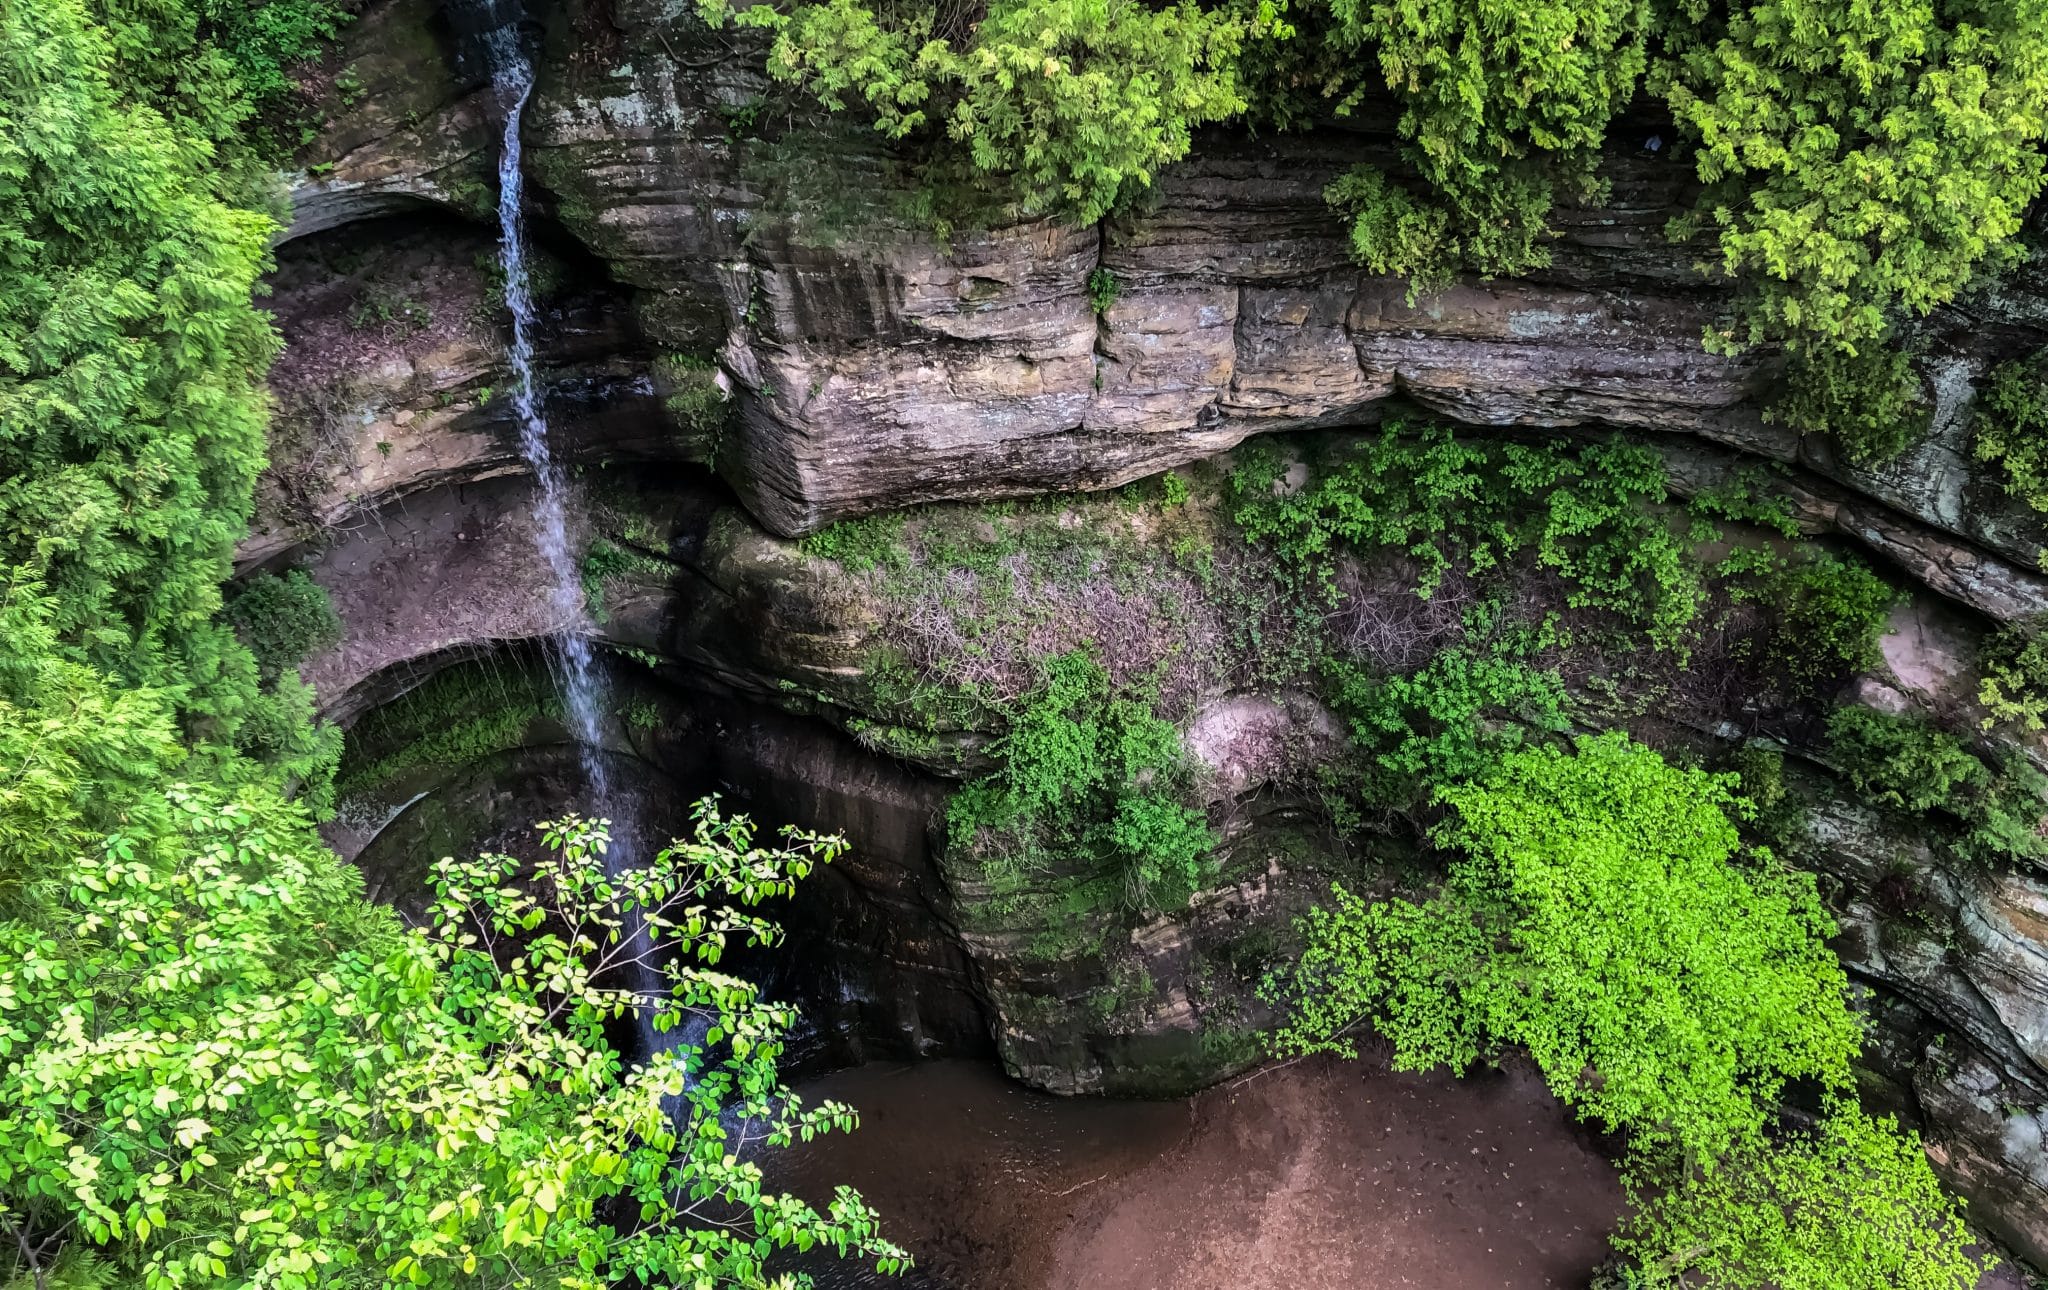 Image of the Wildcat Canyon waterfall near Chicago located in Starved Rock State Park